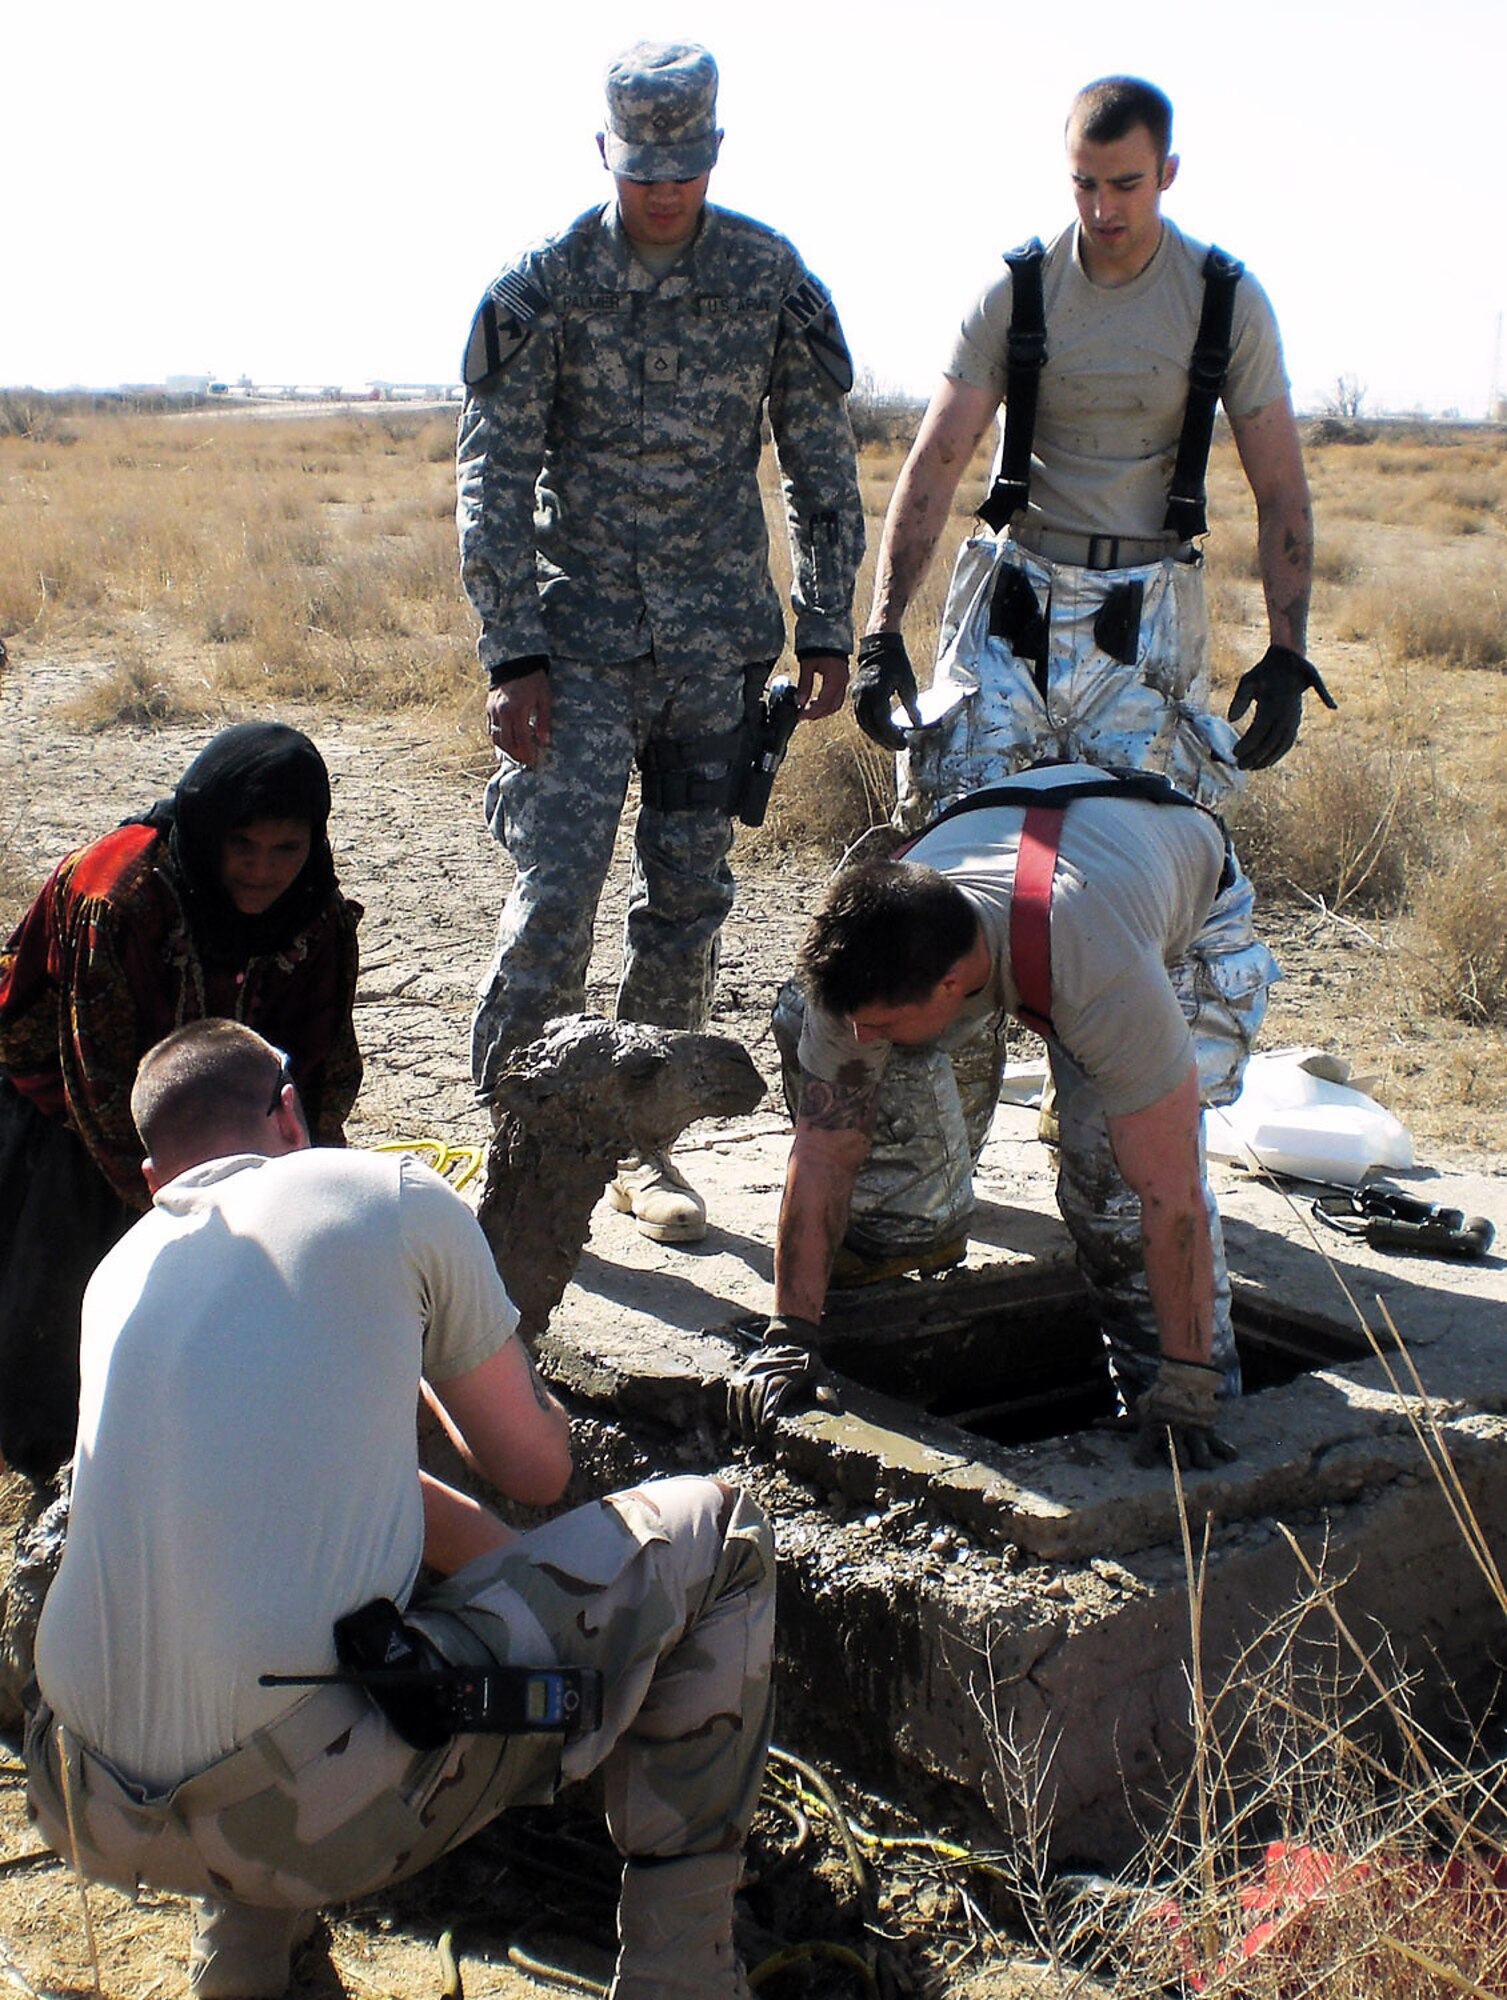 Firefighters rescue a baby camel trapped in a manhole near Ali Base, Iraq, Feb. 9. The firefighters are with the 407th Expeditionary Civil Engineer Squadron. (U.S. Air Force photo/Staff Sgt. Kenya Shiloh) 

